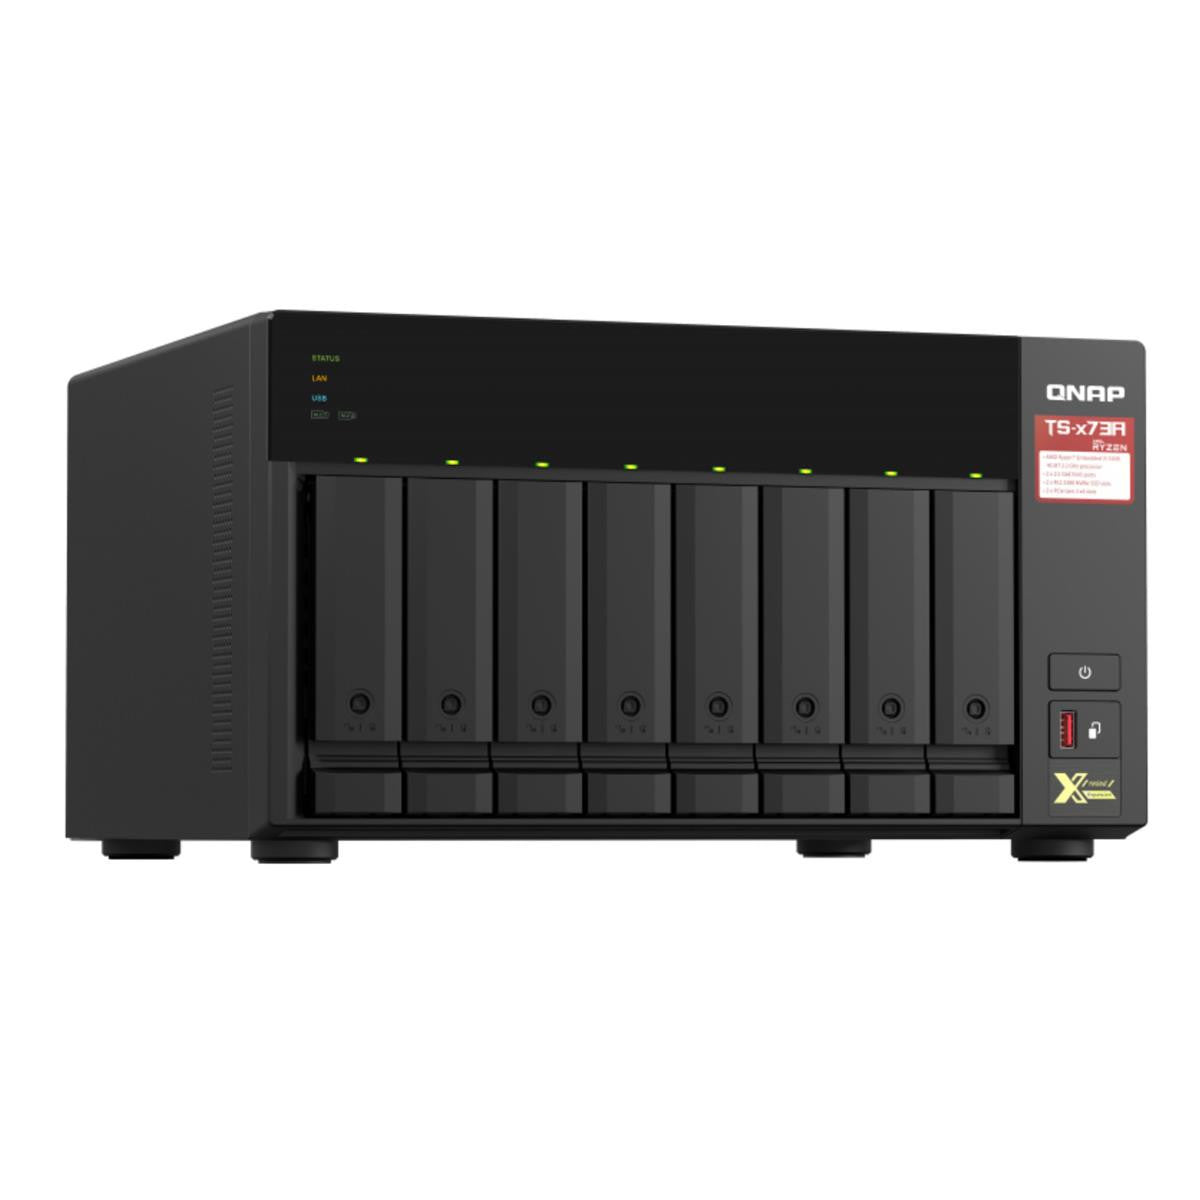 QNAP TS-873A 8-BAY NAS with 8GB DDR4 RAM and 32TB (8x4TB) Western Digital RED PLUS Drives Fully Assembled and Tested